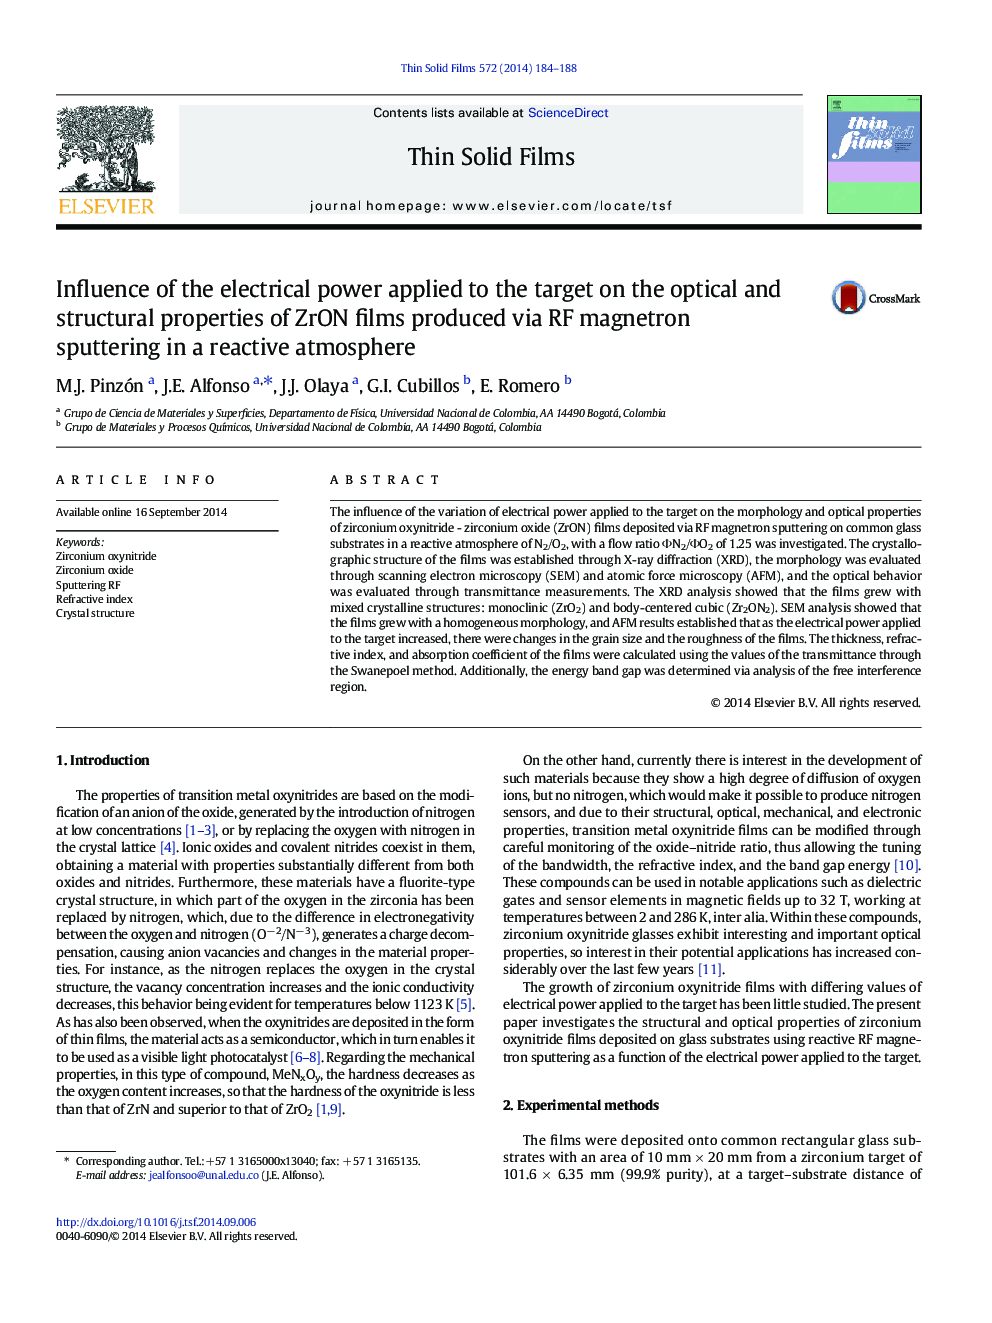 Influence of the electrical power applied to the target on the optical and structural properties of ZrON films produced via RF magnetron sputtering in a reactive atmosphere